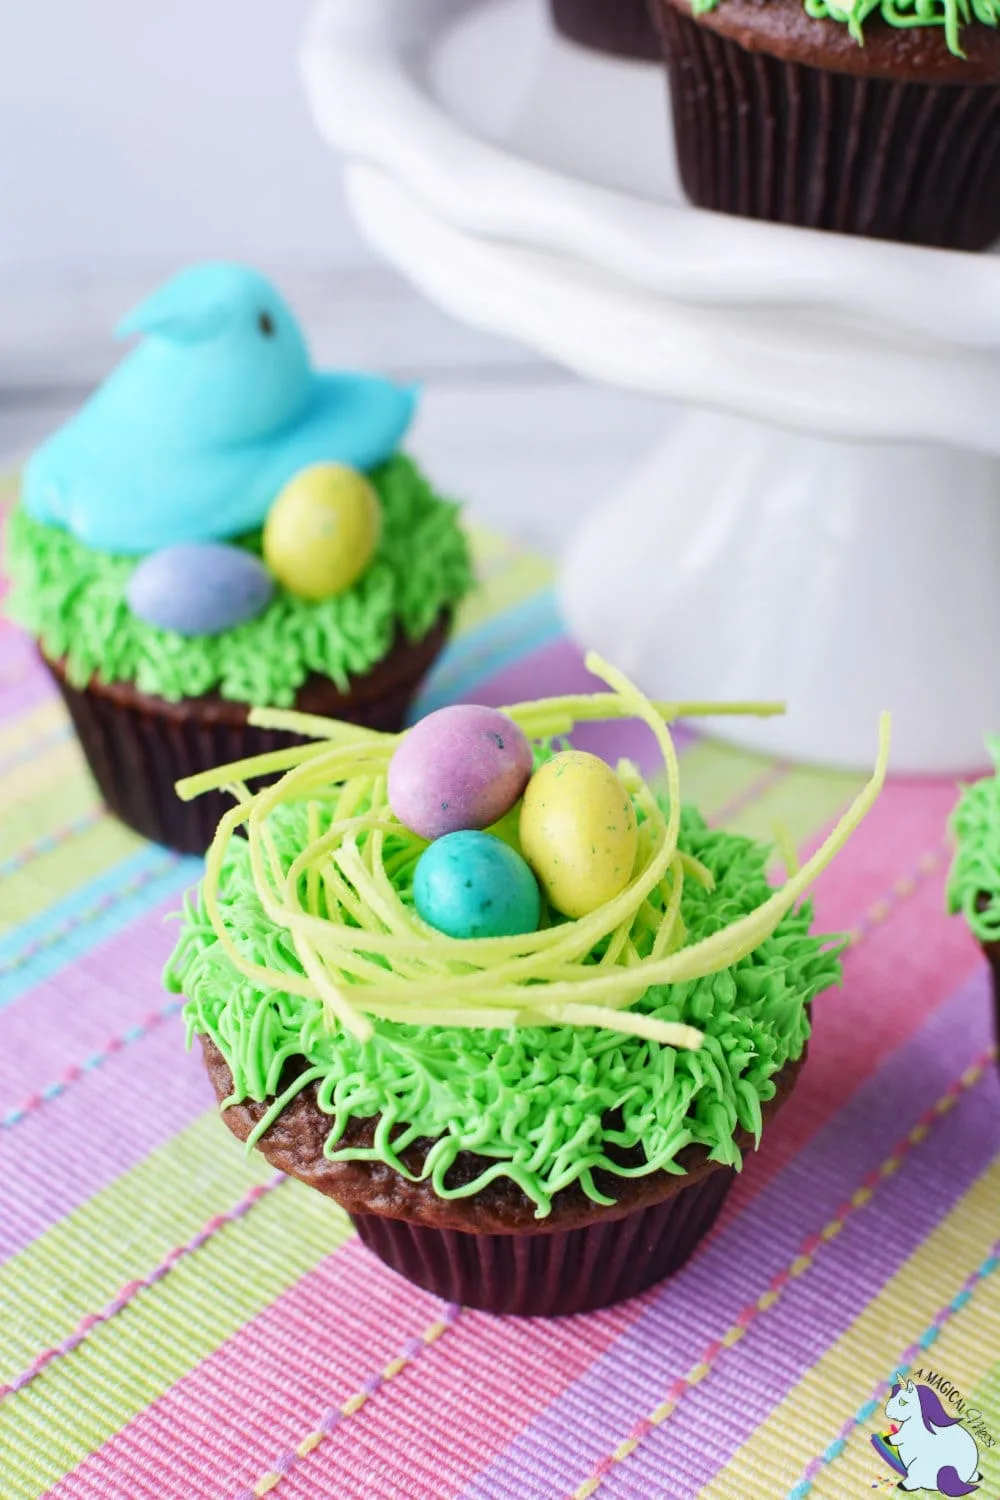 Chocolate cupcakes topped with Easter eggs, edible grass, and marshmallow Peeps. 